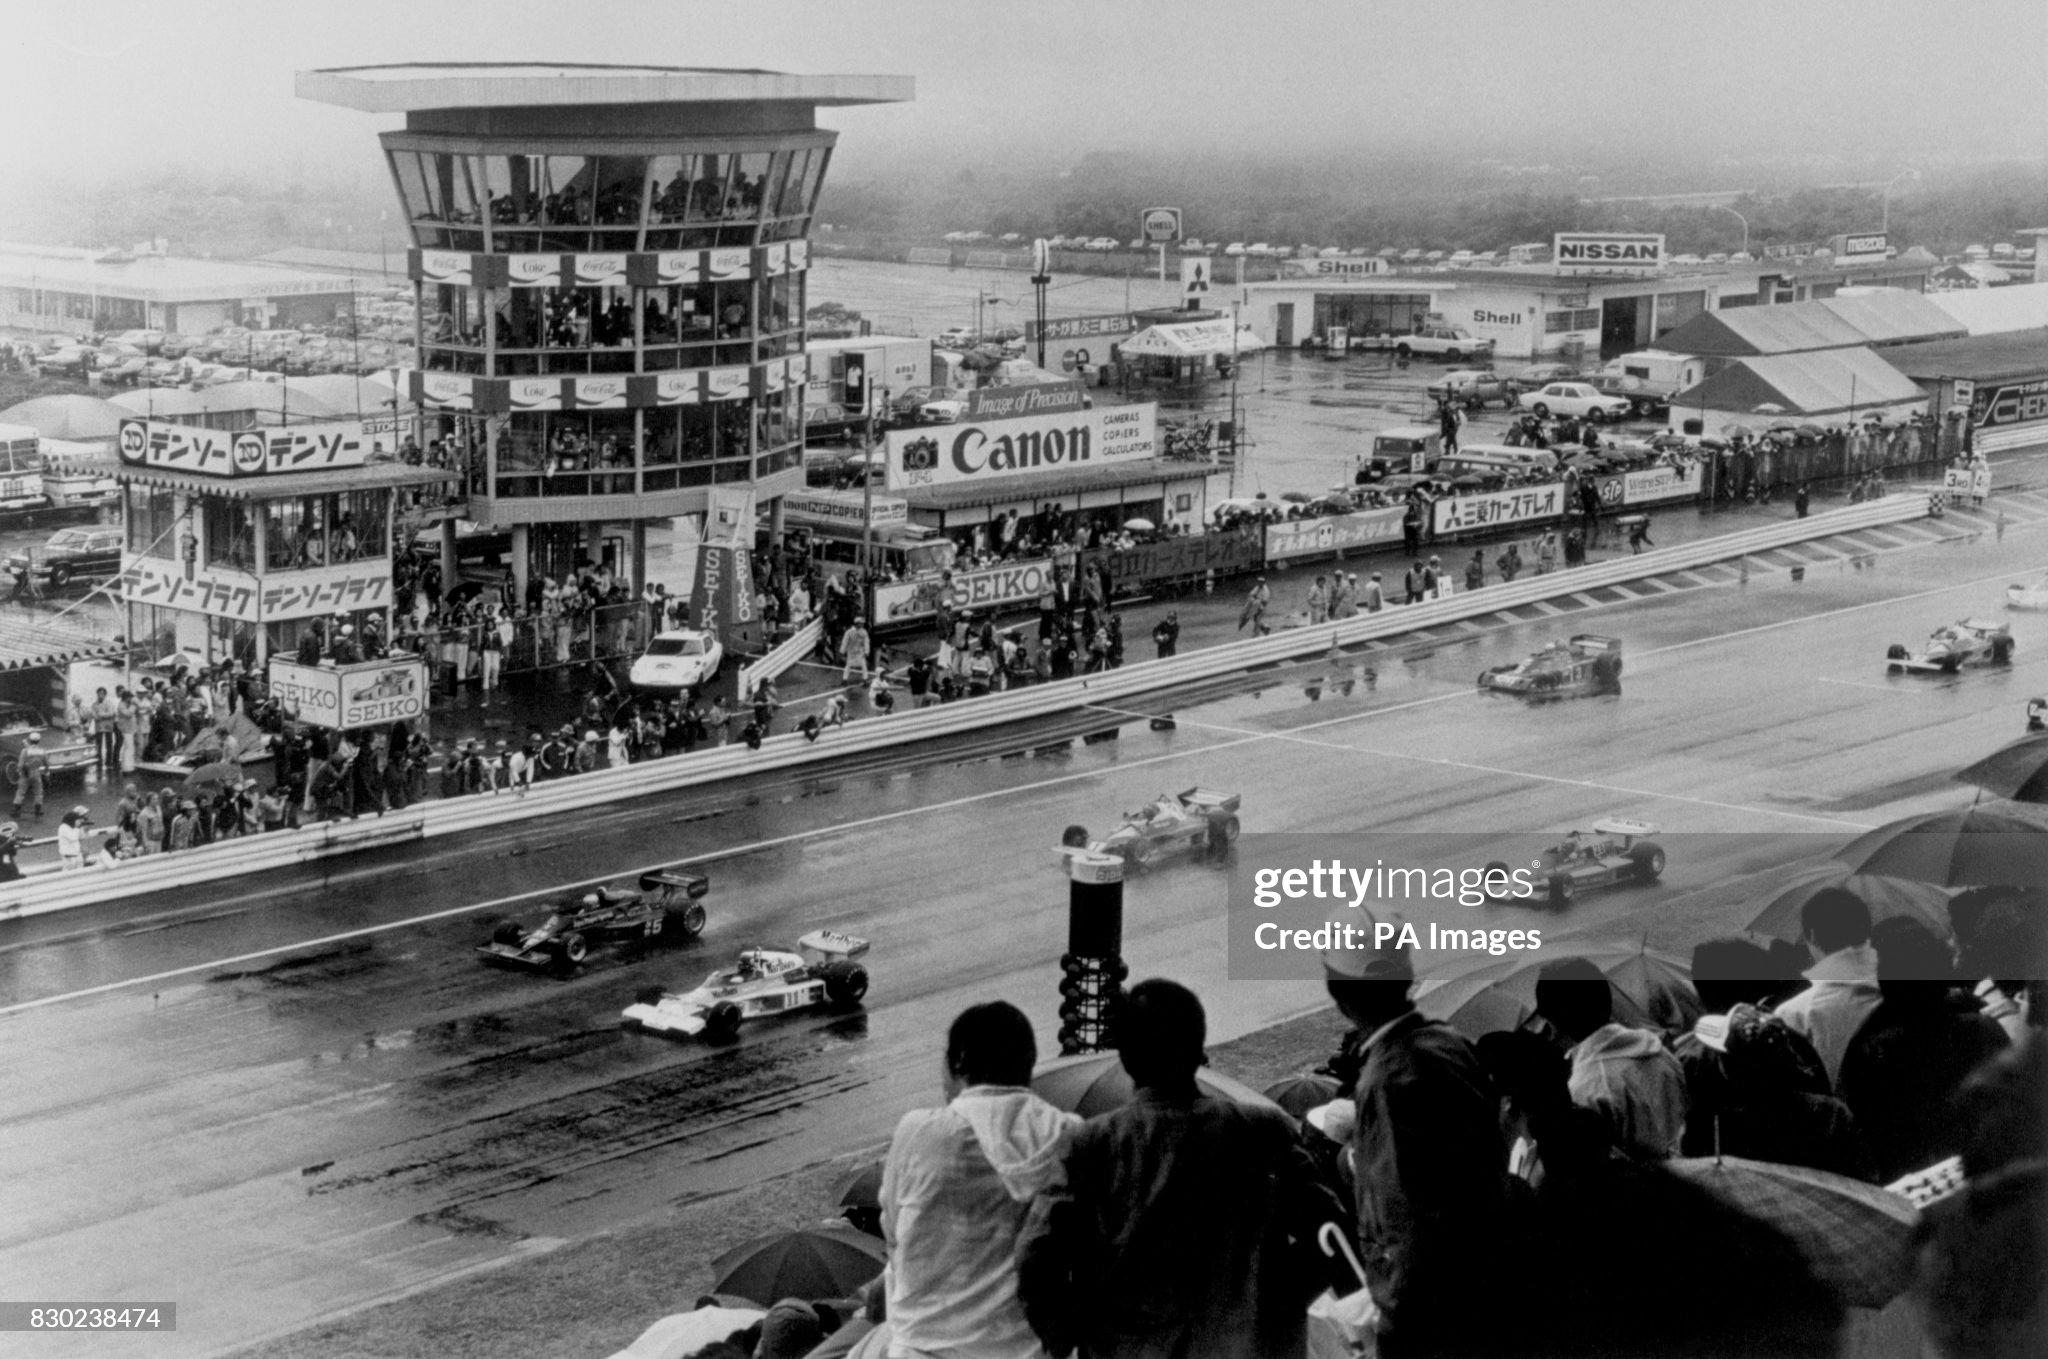 James Hunt in a McLaren and Mario Andretti in a Lotus lead the way during the Japanese Grand Prix at Fuji on 28 October 1976. 